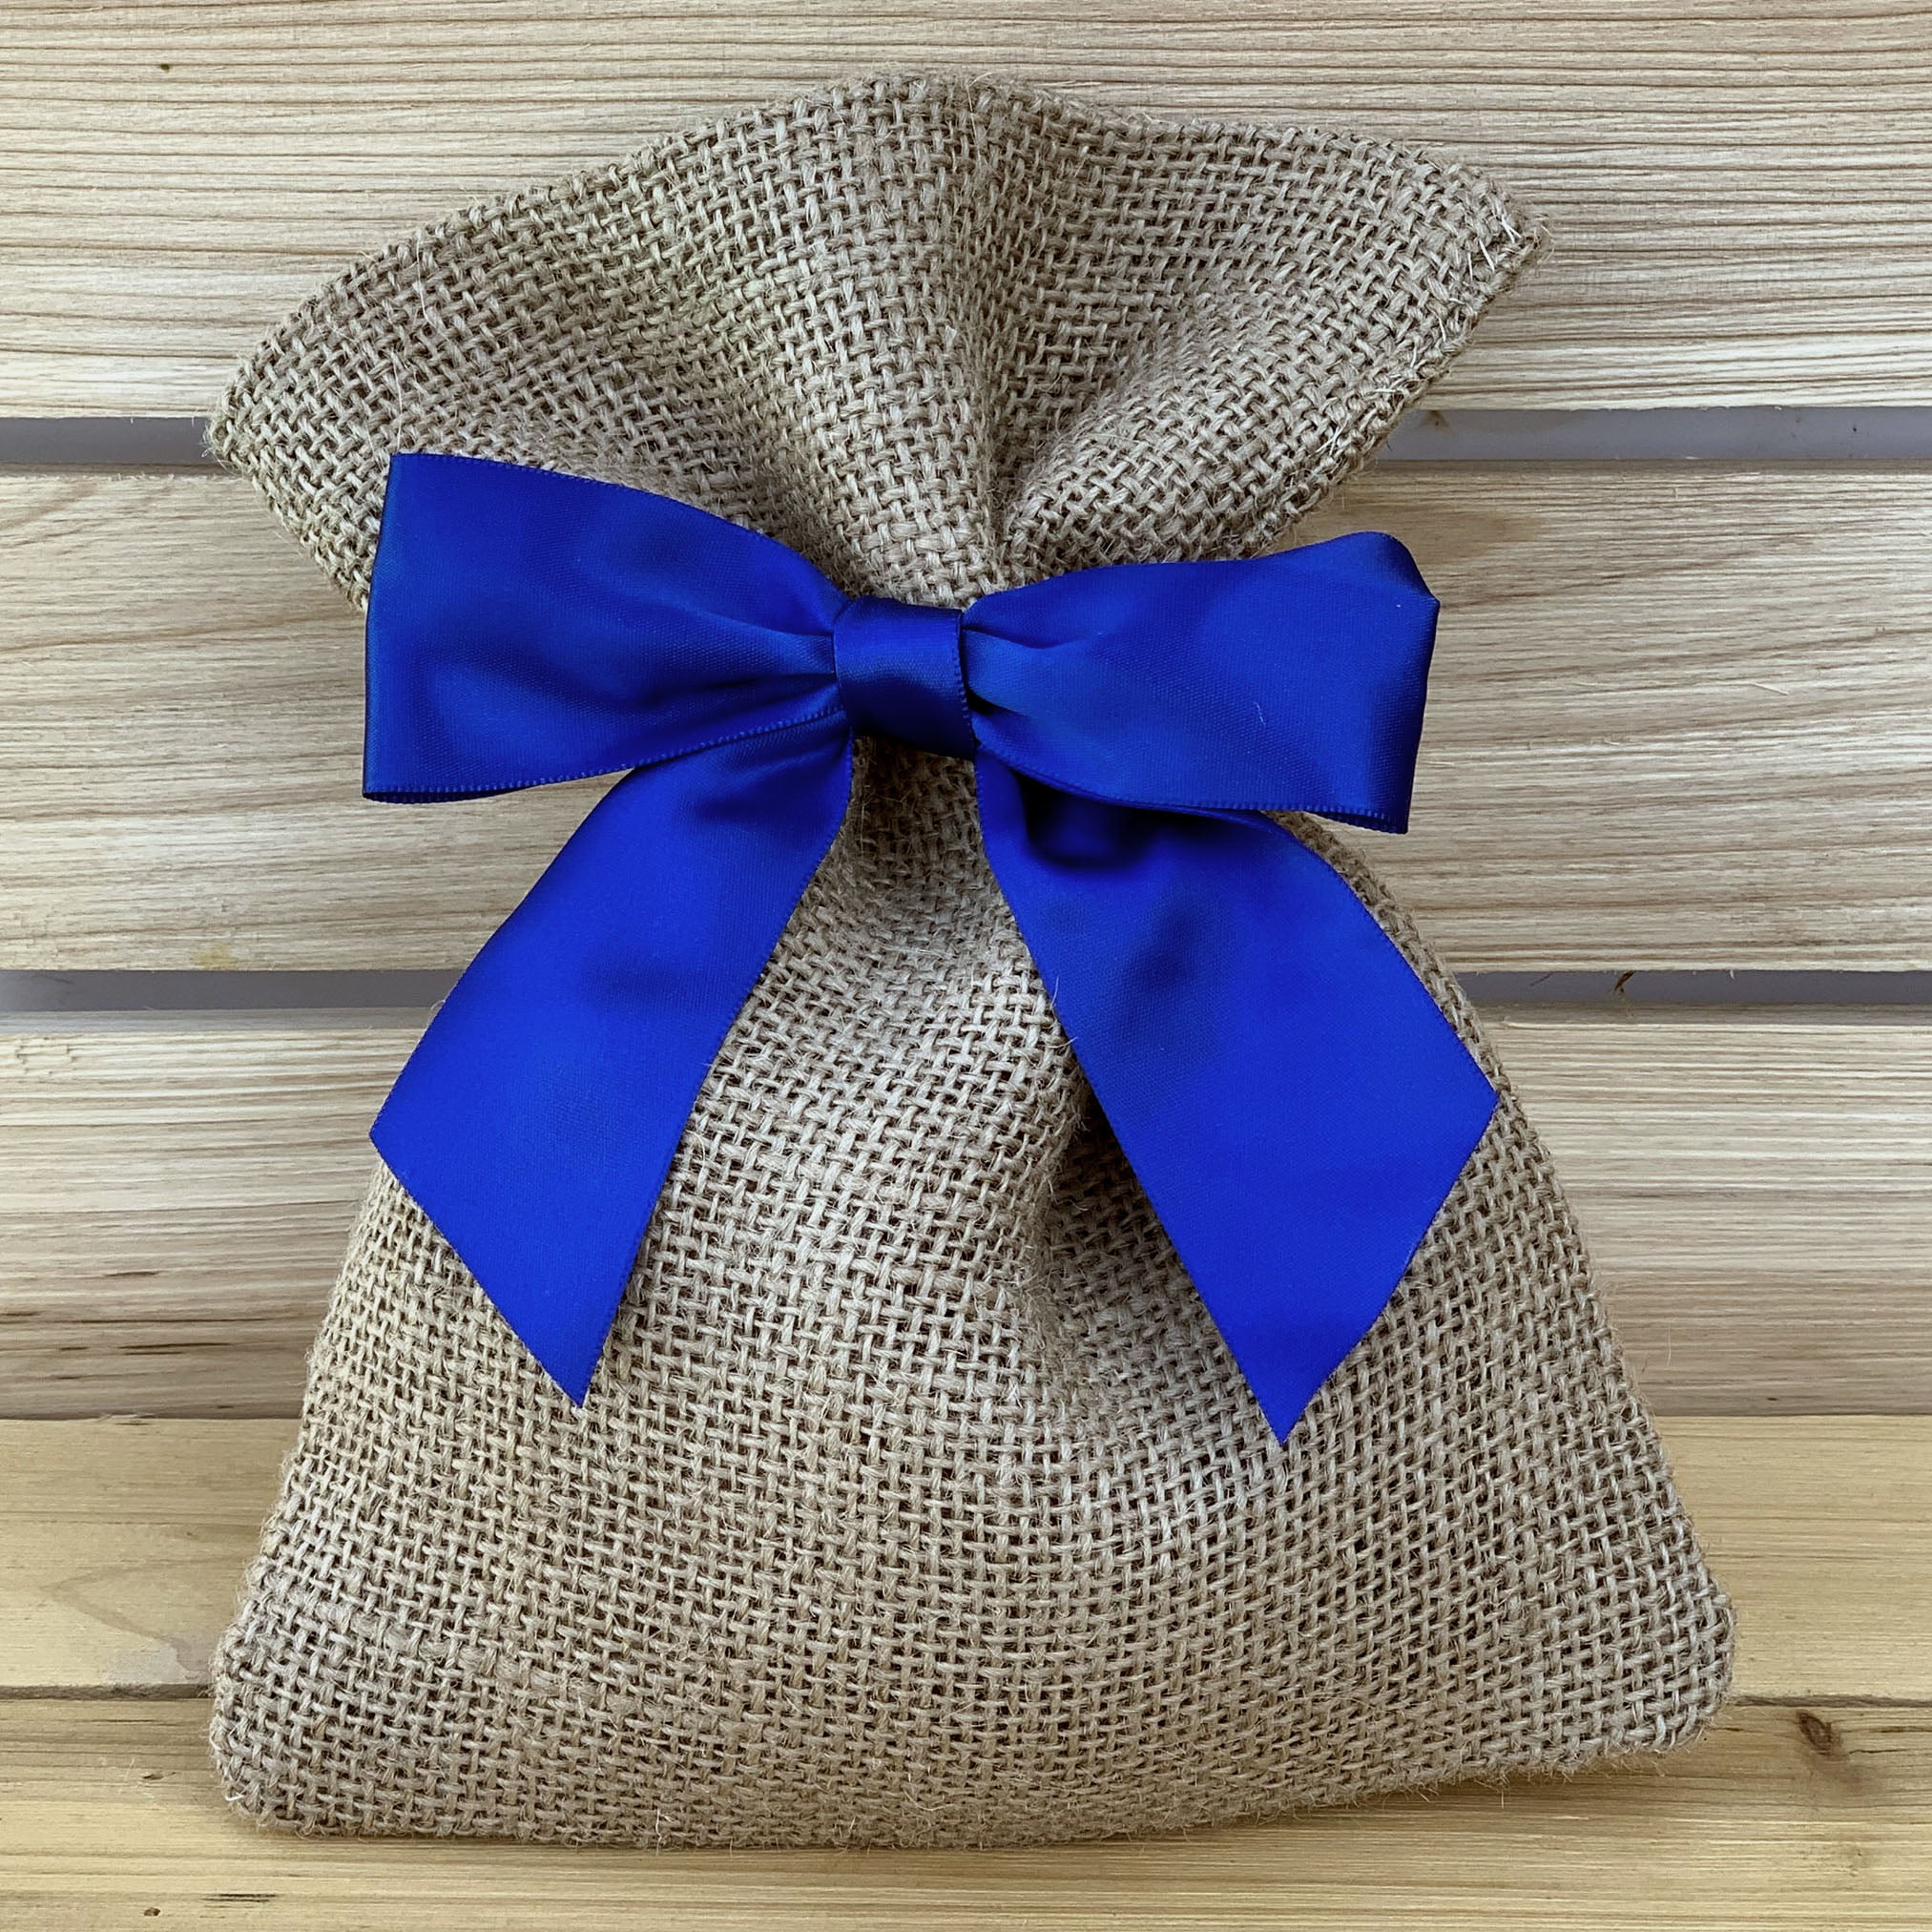 Double Faced Satin Ribbon 1.5 inch Cobalt Blue Ribbon 25 Yard Silk Fabric Ribbon Perfect for Gift Wrapping Wedding Decoration Bow Making DIY Crafts